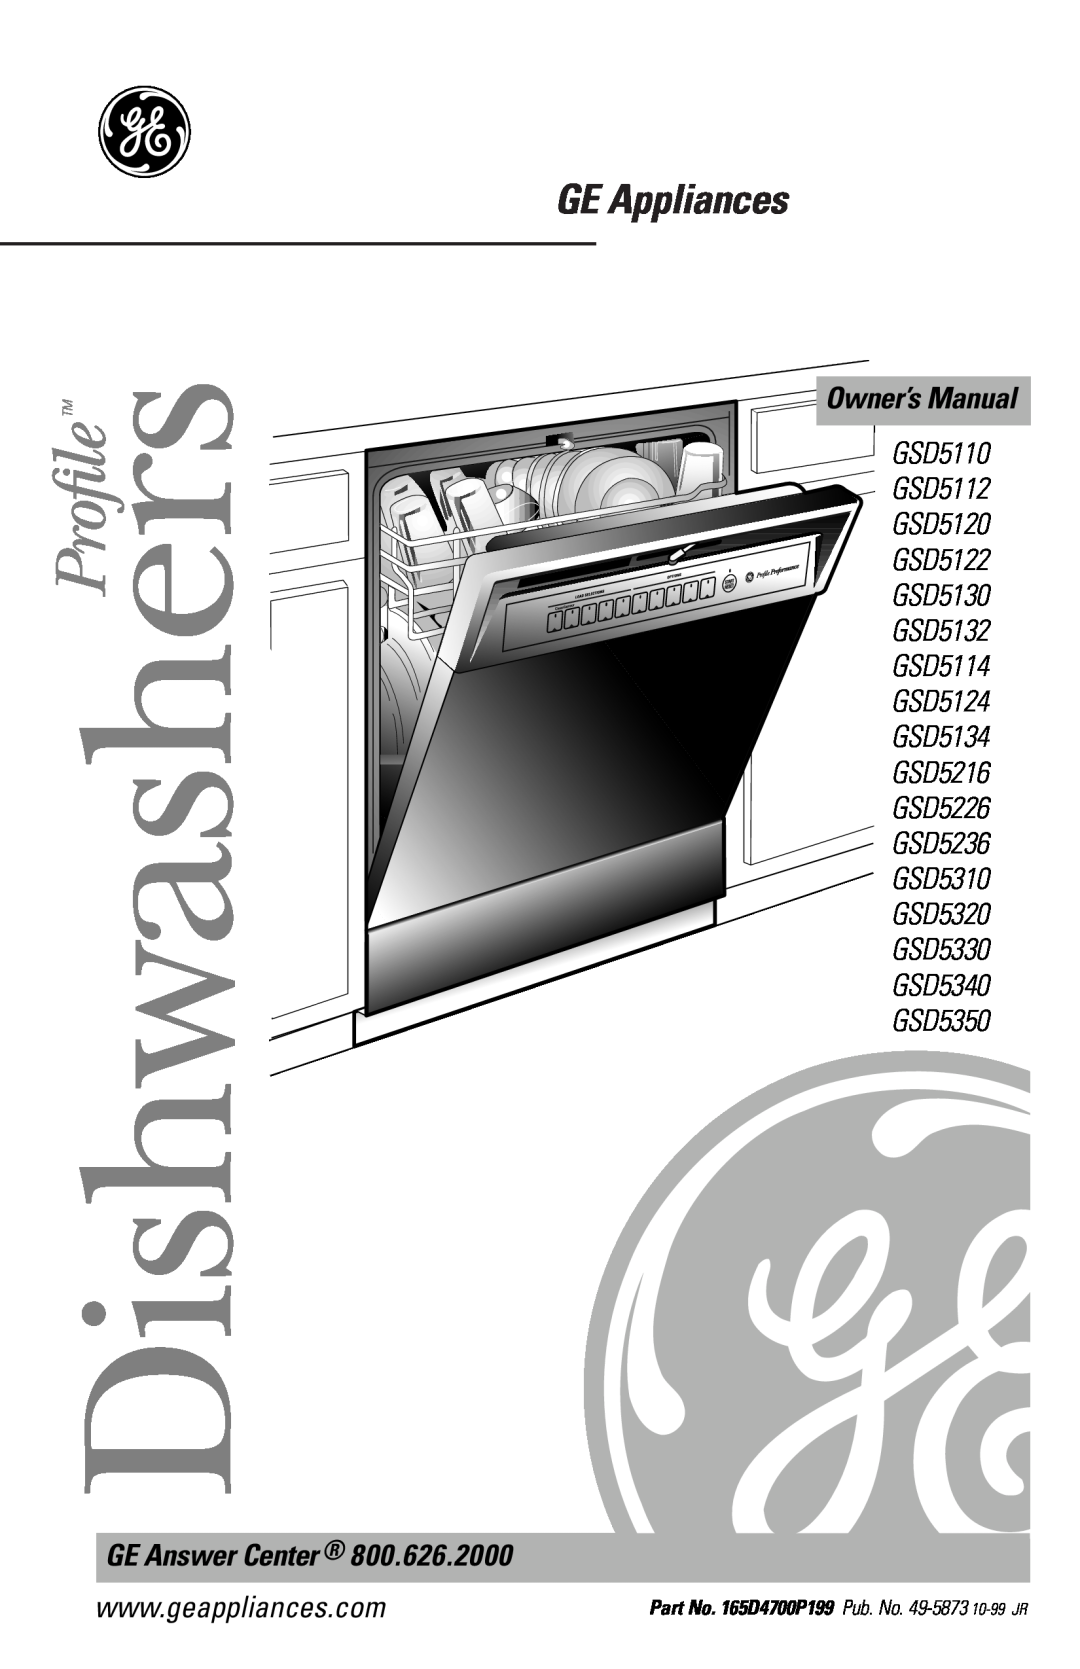 GE GSD5320 owner manual GE Appliances, GE Answer Center, EDW2020 EDW2030 EDW2050 EDW2060 GSD5110 GSD5112 GSD5120 GSD5122 